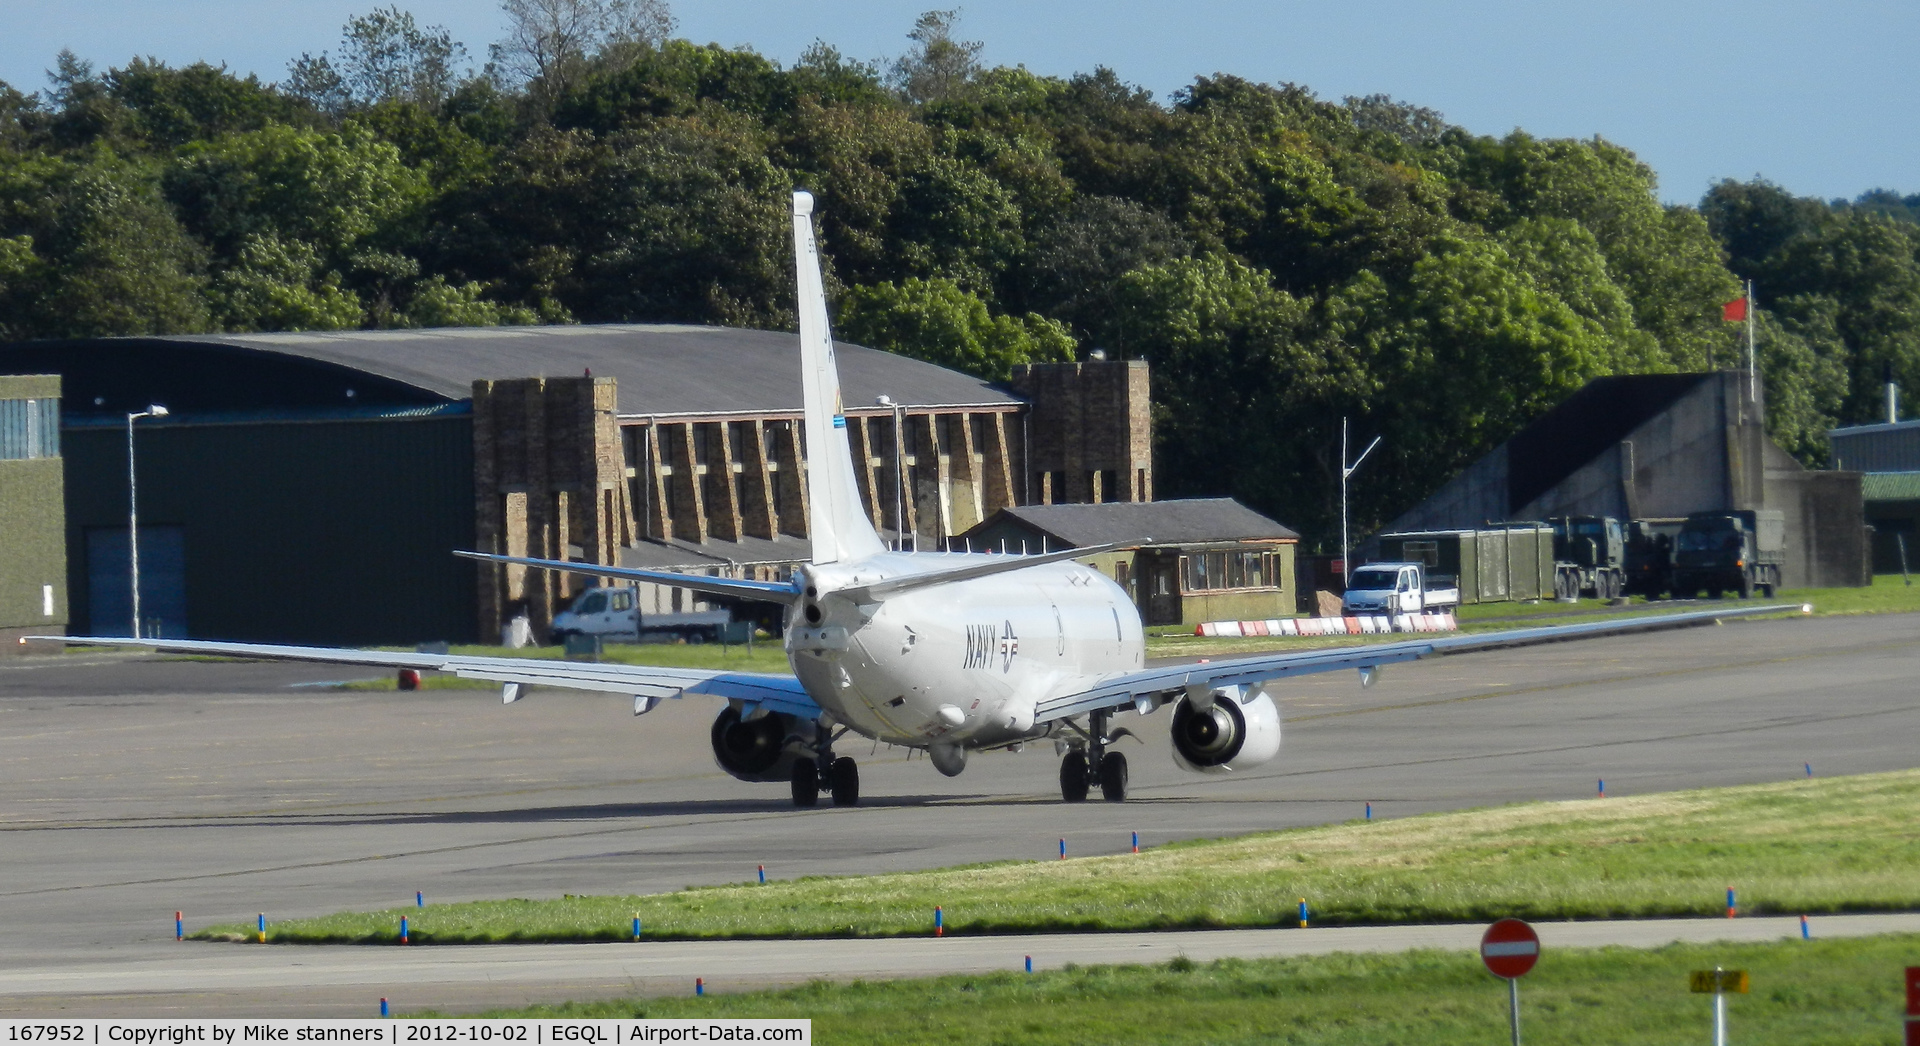 167952, 2011 Boeing P-8A Poseidon C/N 40594, Patuxent River based P-8A Poseidon from VX-1 